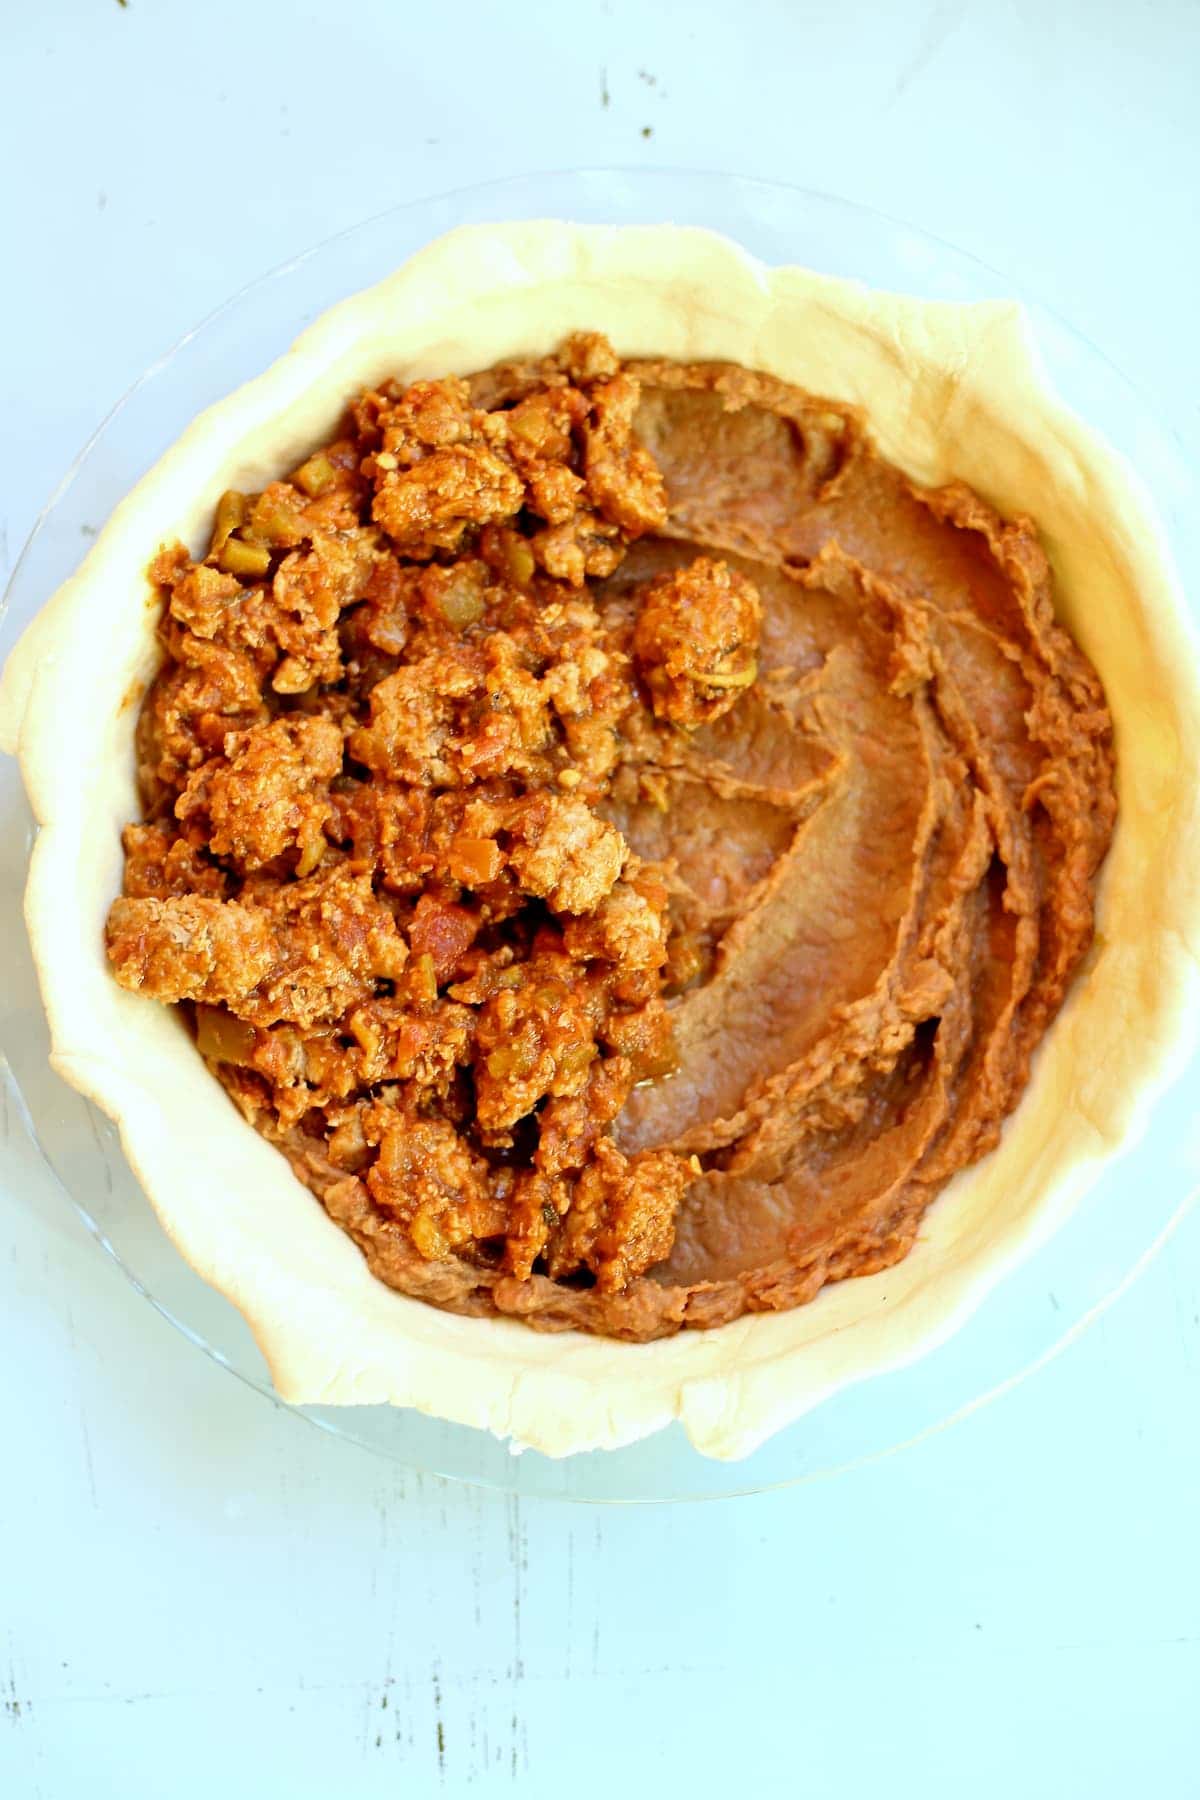 an uncooked meat pie with beans on one side and taclo meat on the other, sitting on a blue table.